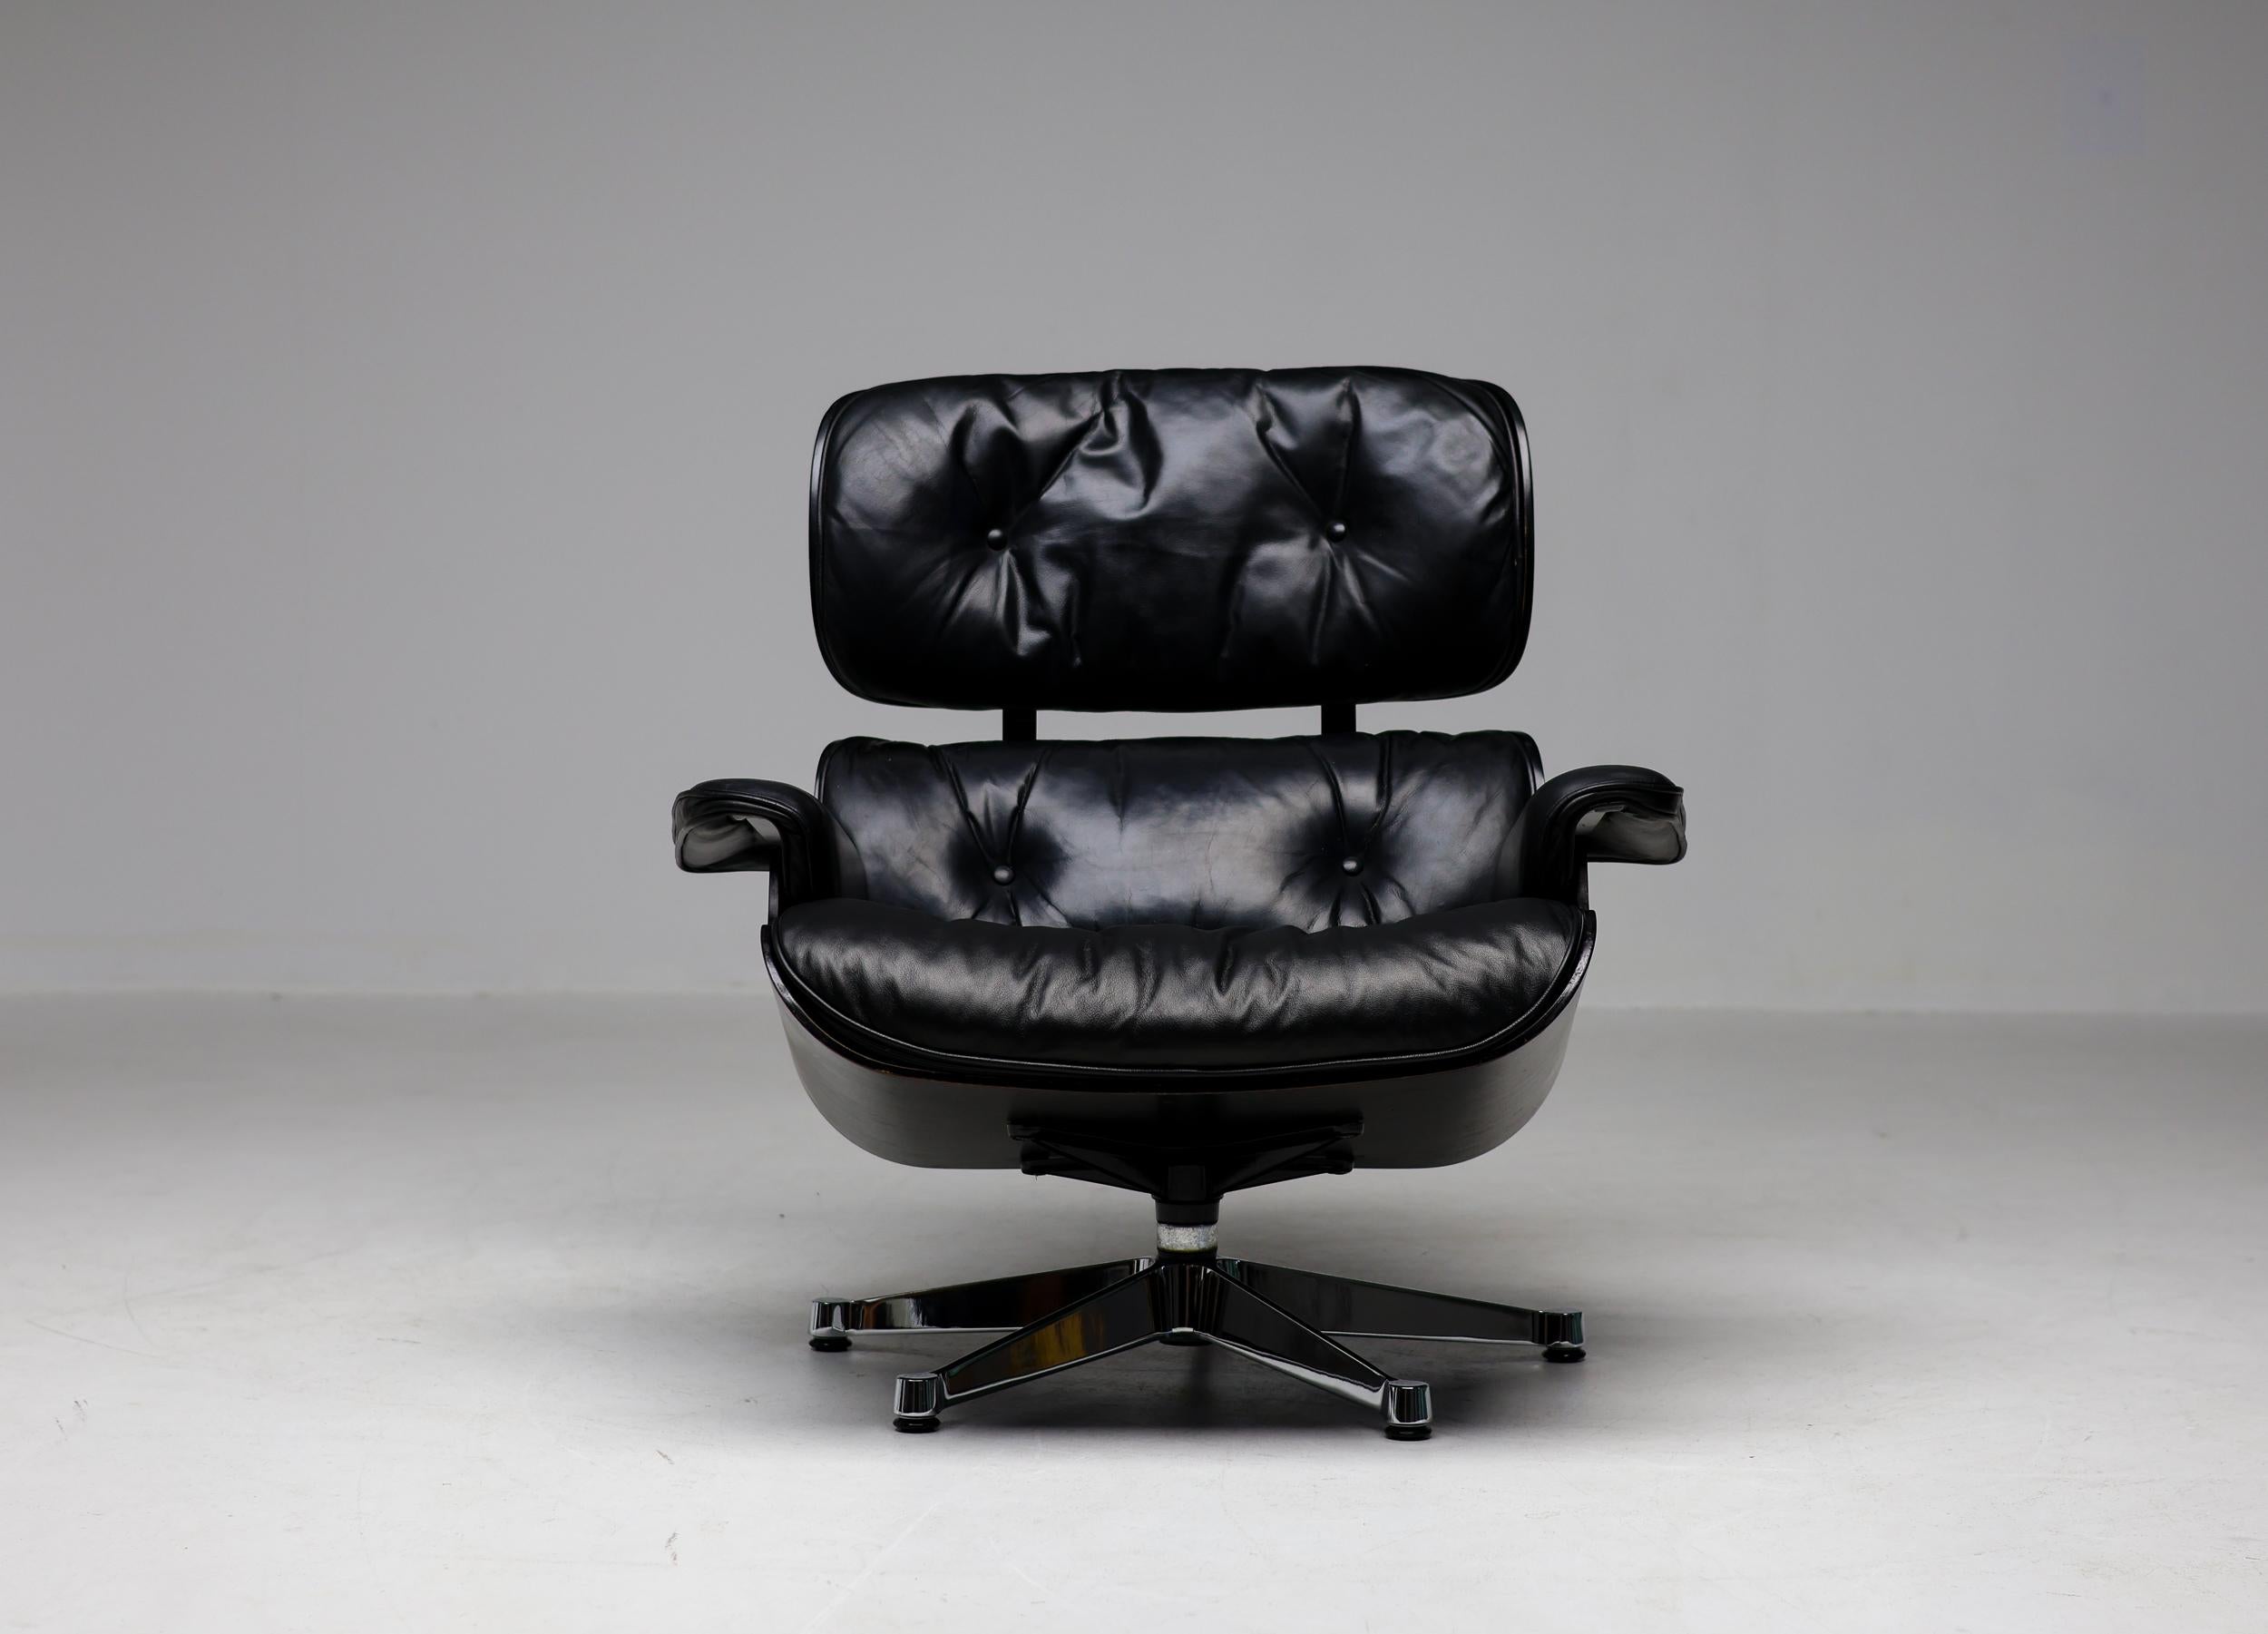 Lounge Chair designed by Charles and Ray Eames for Herman Miller, with black lacquered plywood shells and black leather upholstery. This example with chrome plated aluminum base and hardware was produced in 1979, especially for the European market.